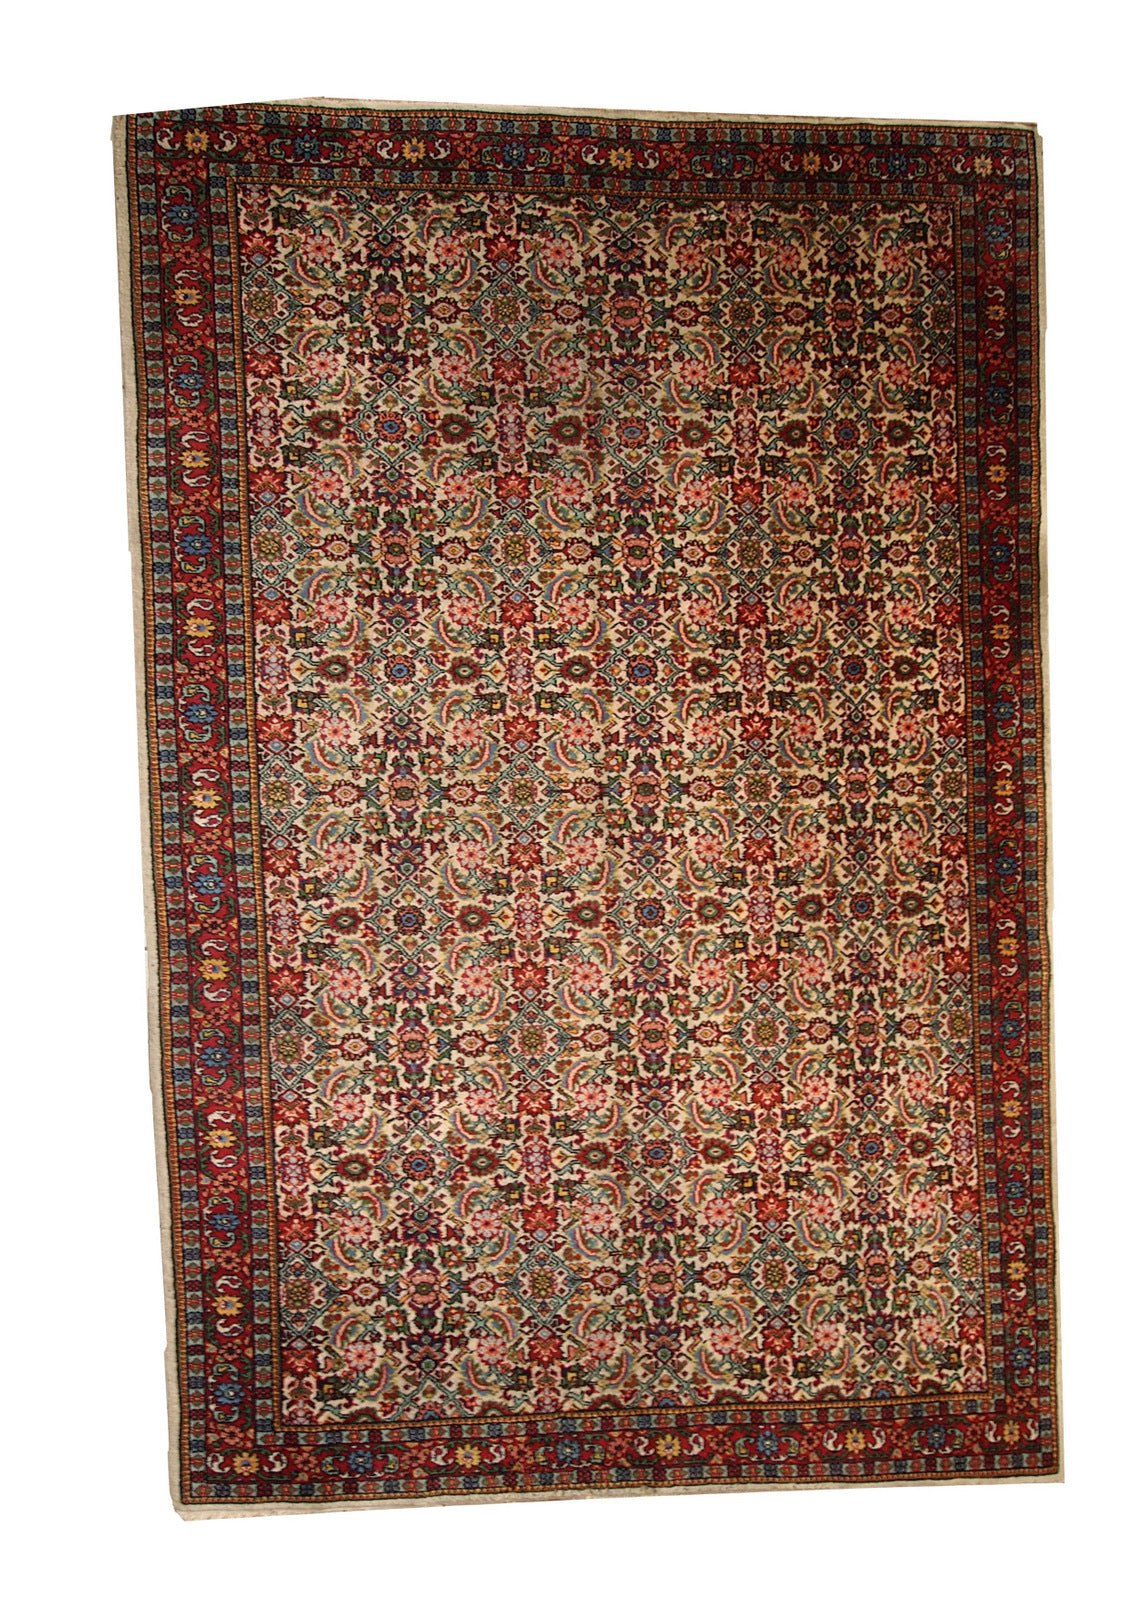 Antique Indian Indo-Mahal rug in red, pink, green, sky blue, beige, and azure shades